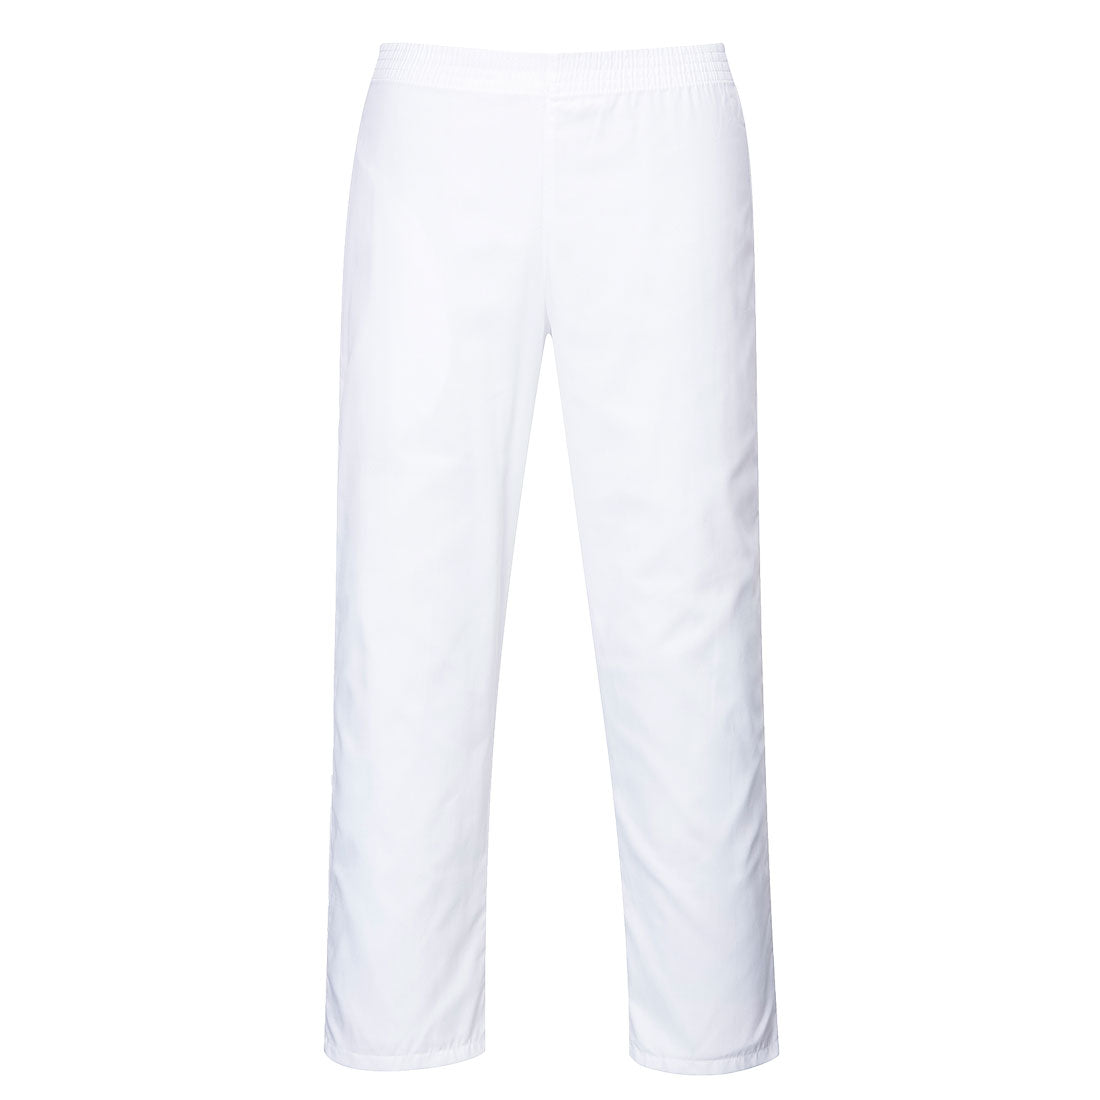 Portwest 2208 Bakers Trousers for Food Industry